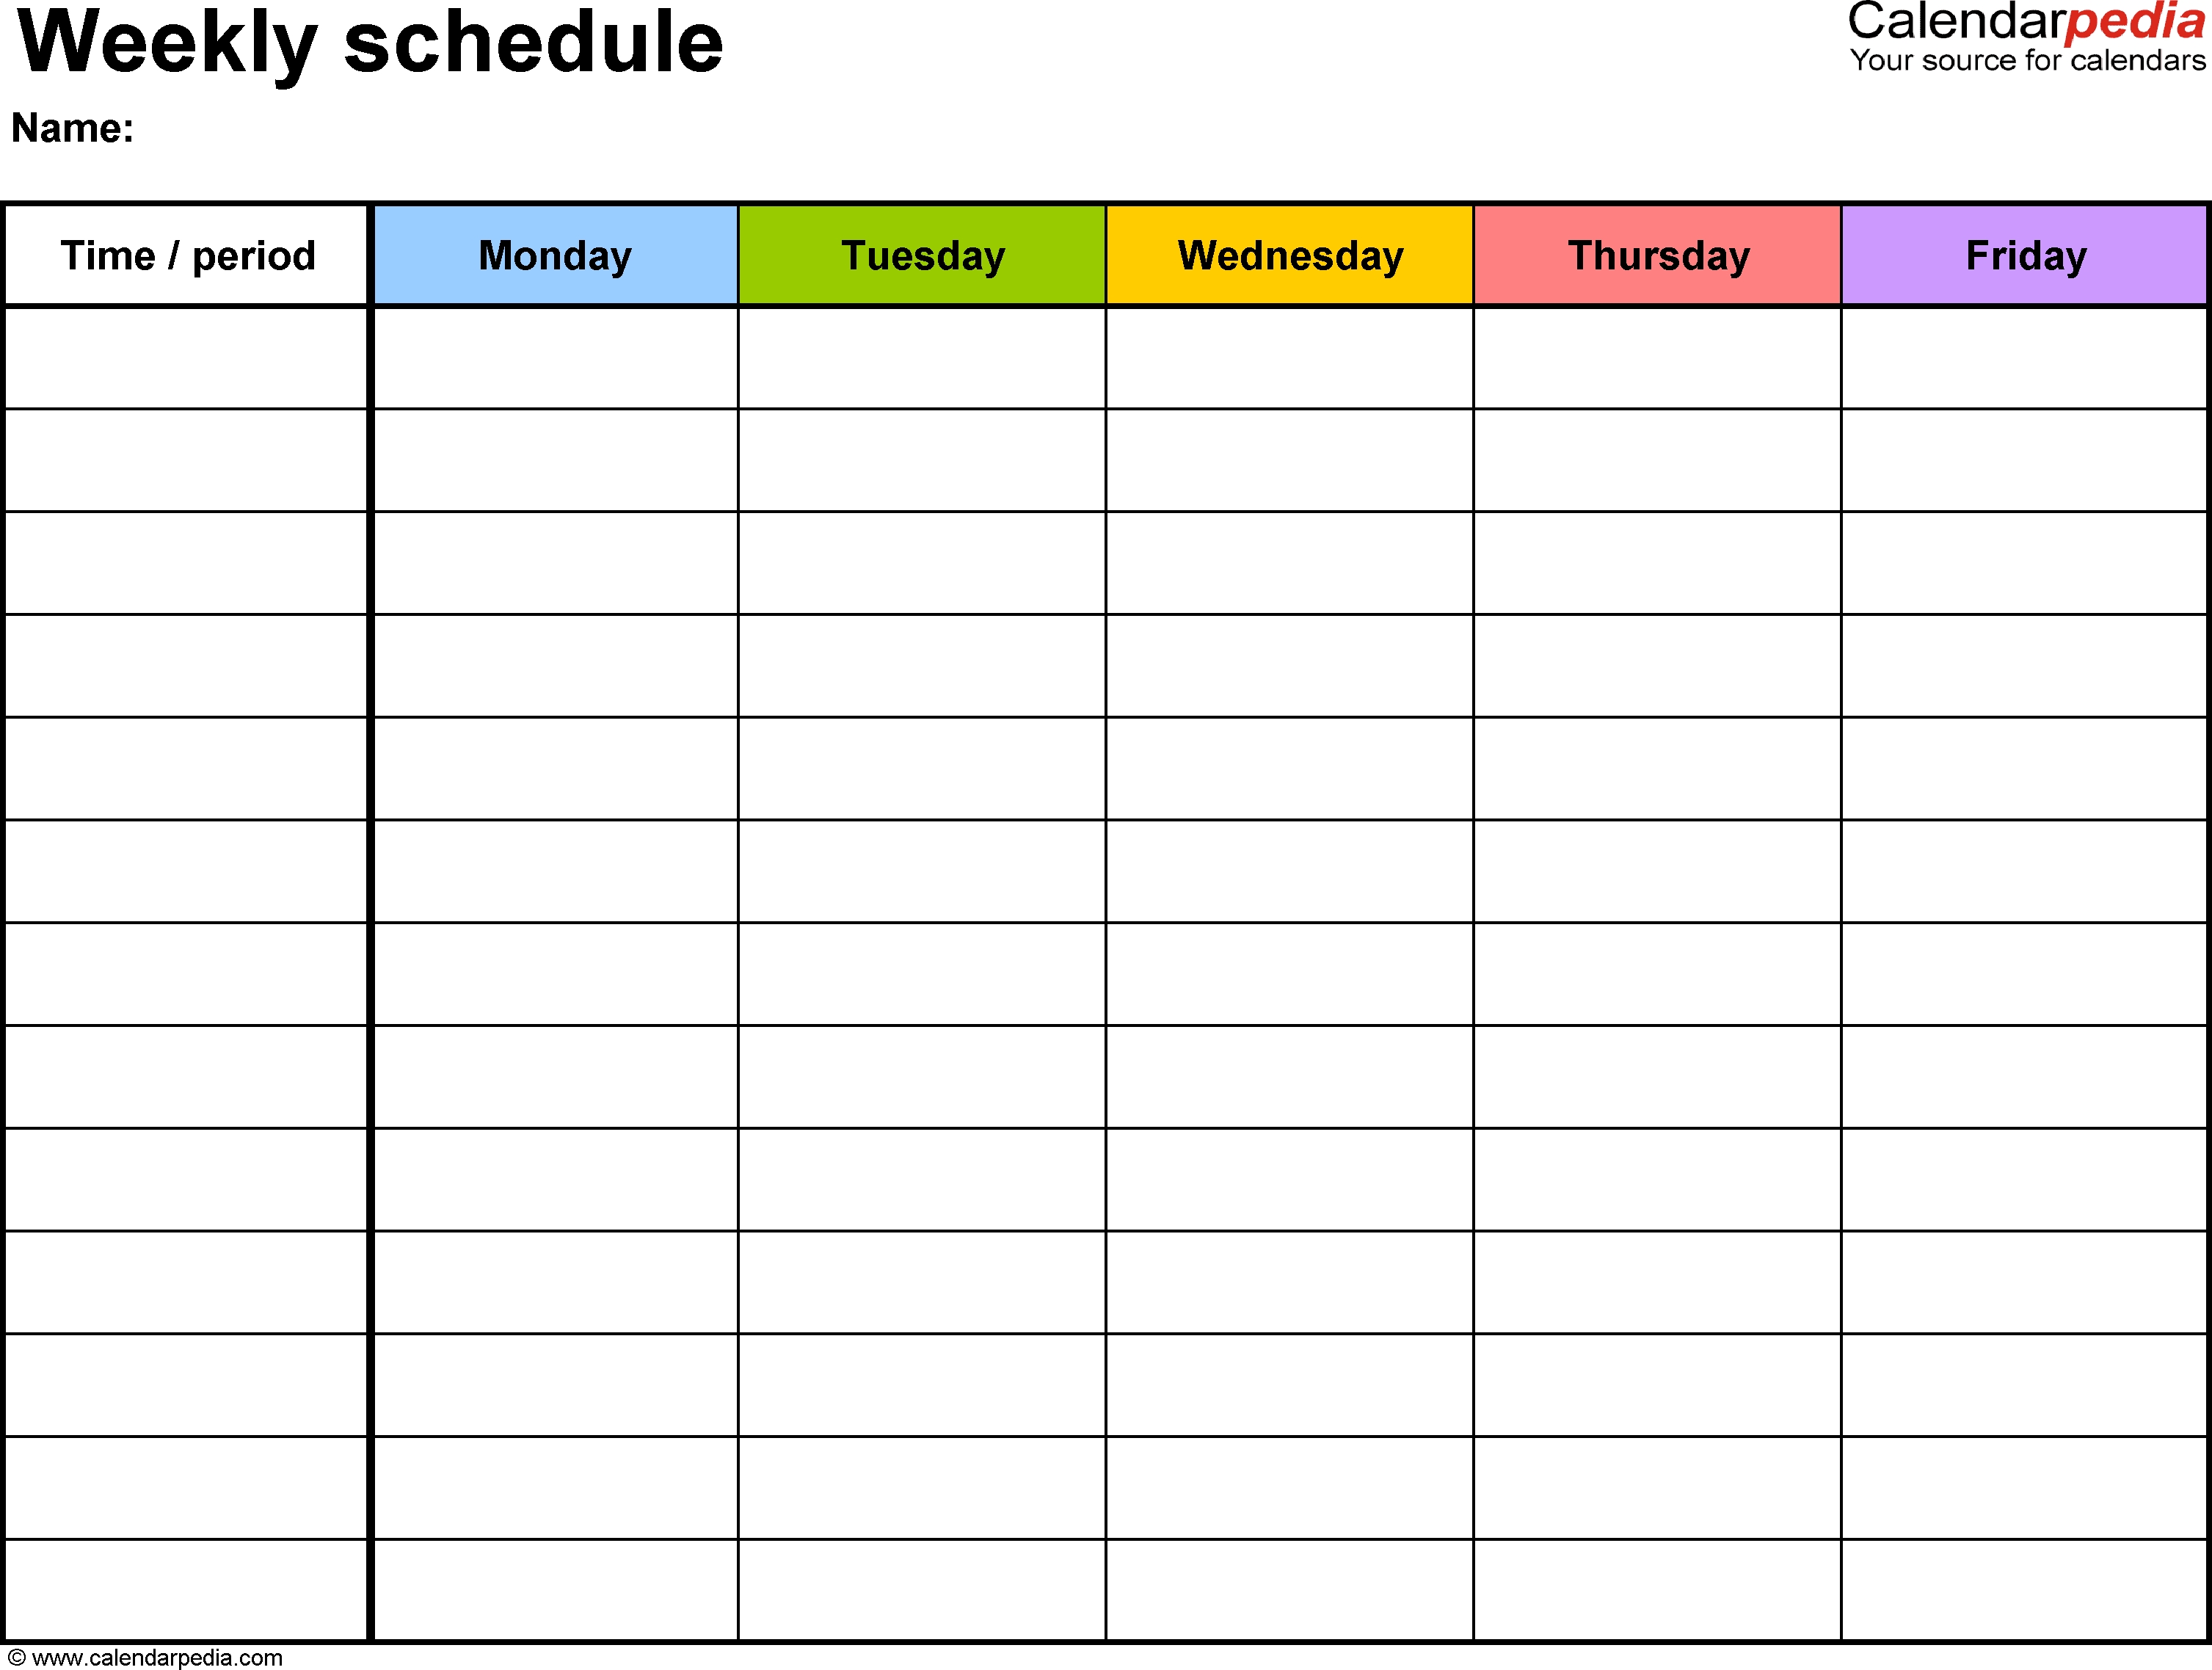 Free Weekly Schedule Templates For Word - 18 Templates  Blank Weekly Calendar Template Free